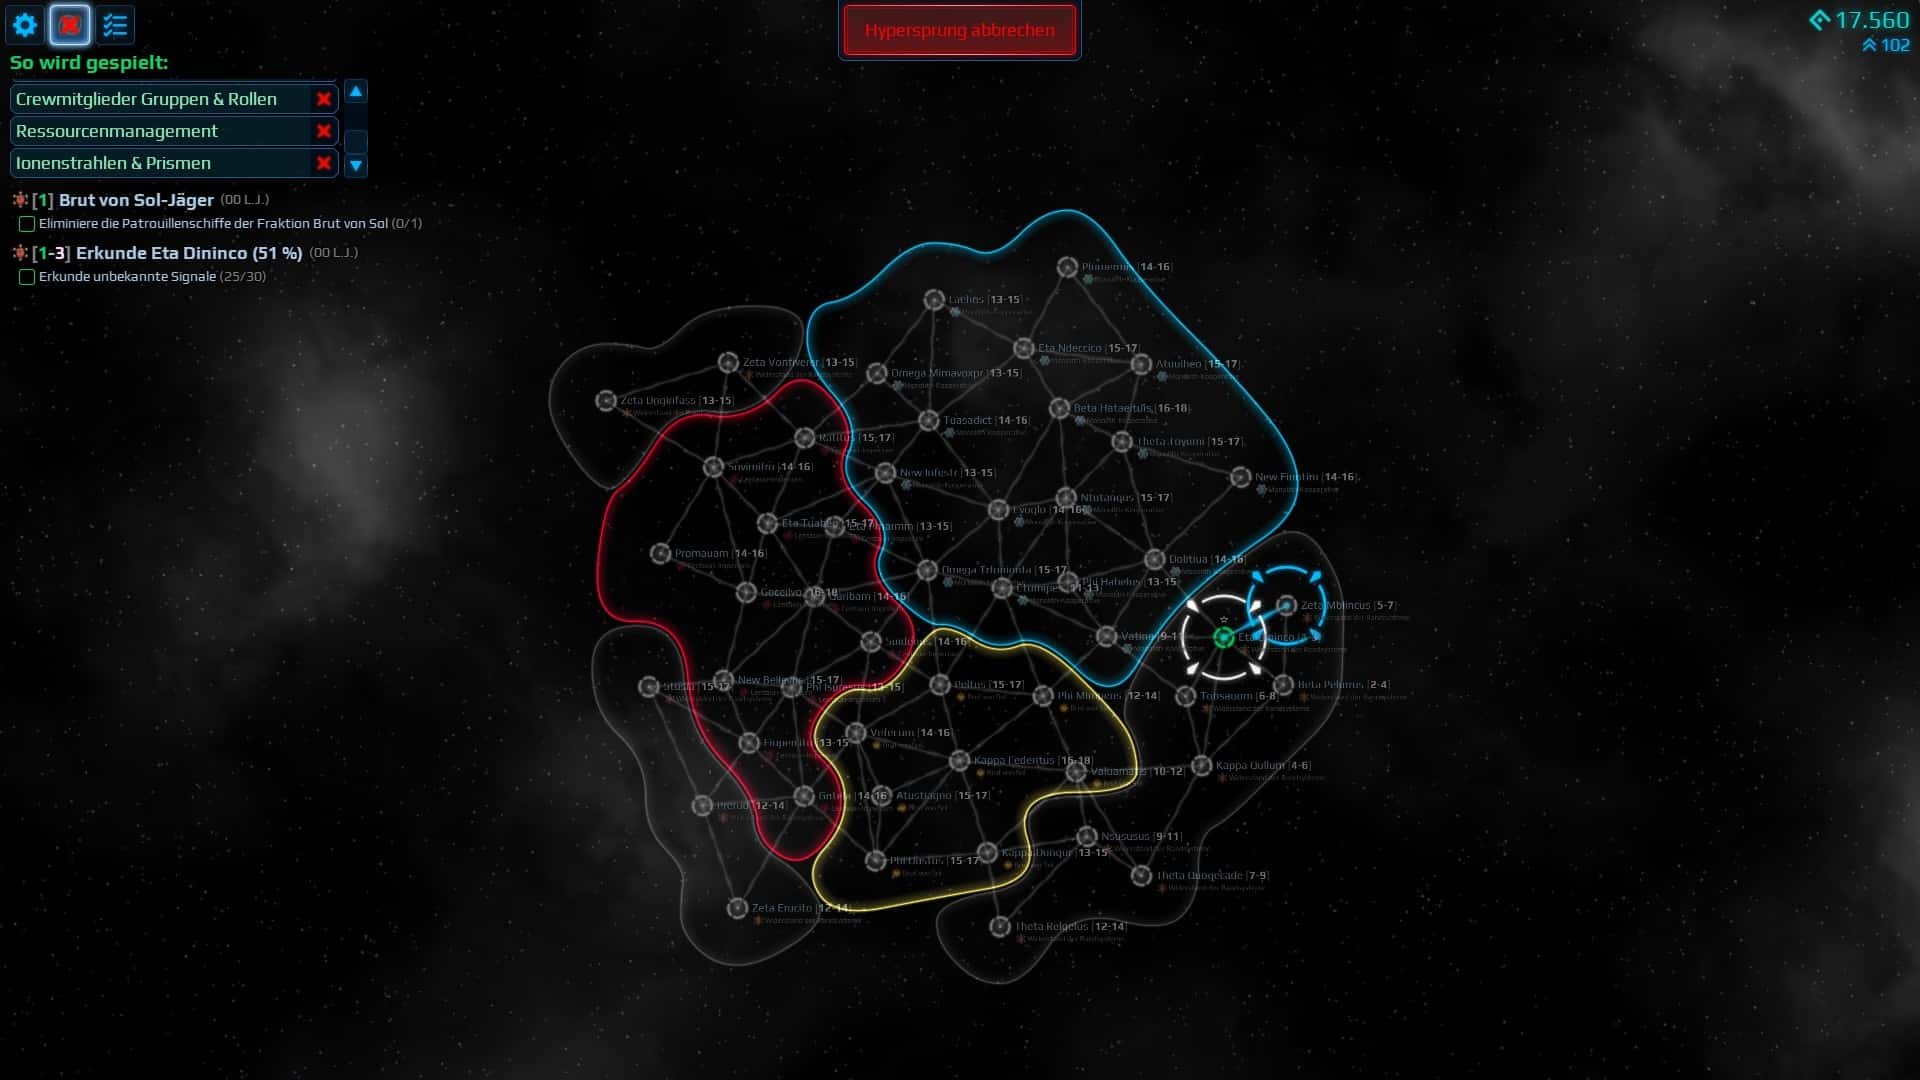 (The galaxy map includes several dozen star systems but they are too similar.)